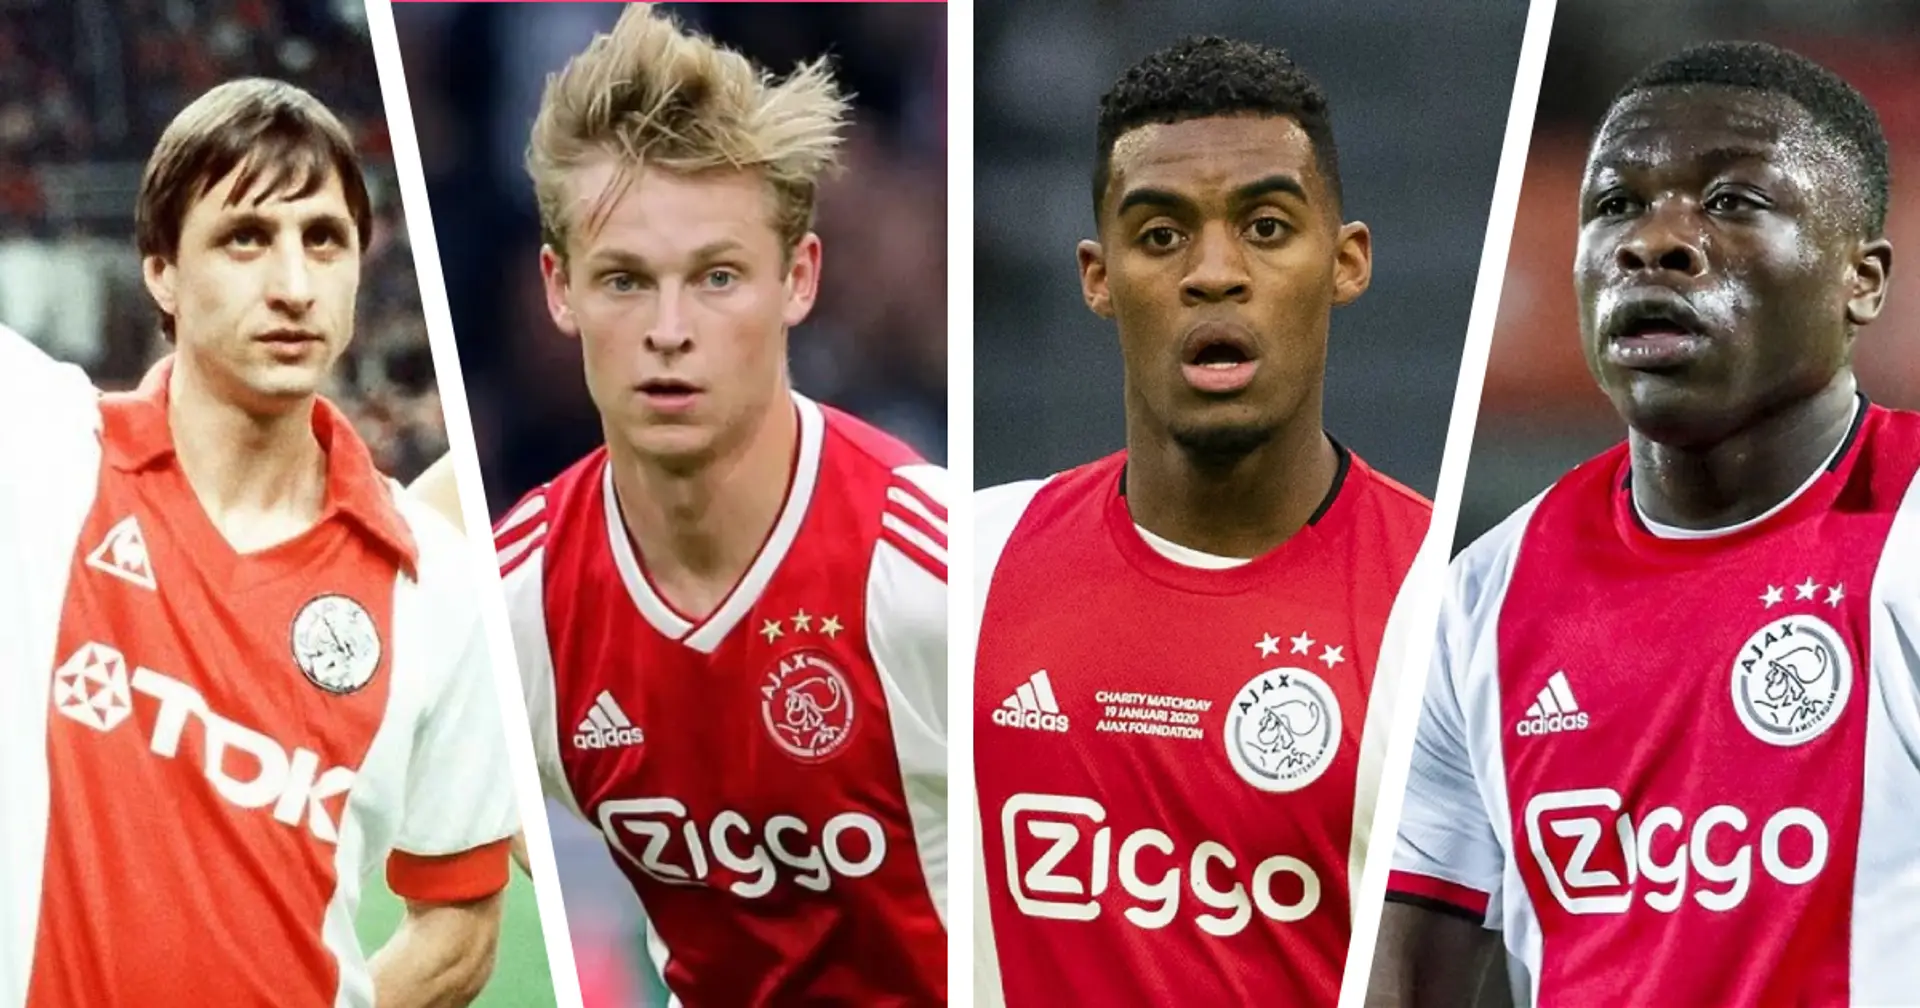 Following Cruyffs and De Jongs: 5 Ajax talents who could become Barca superstars for next decade